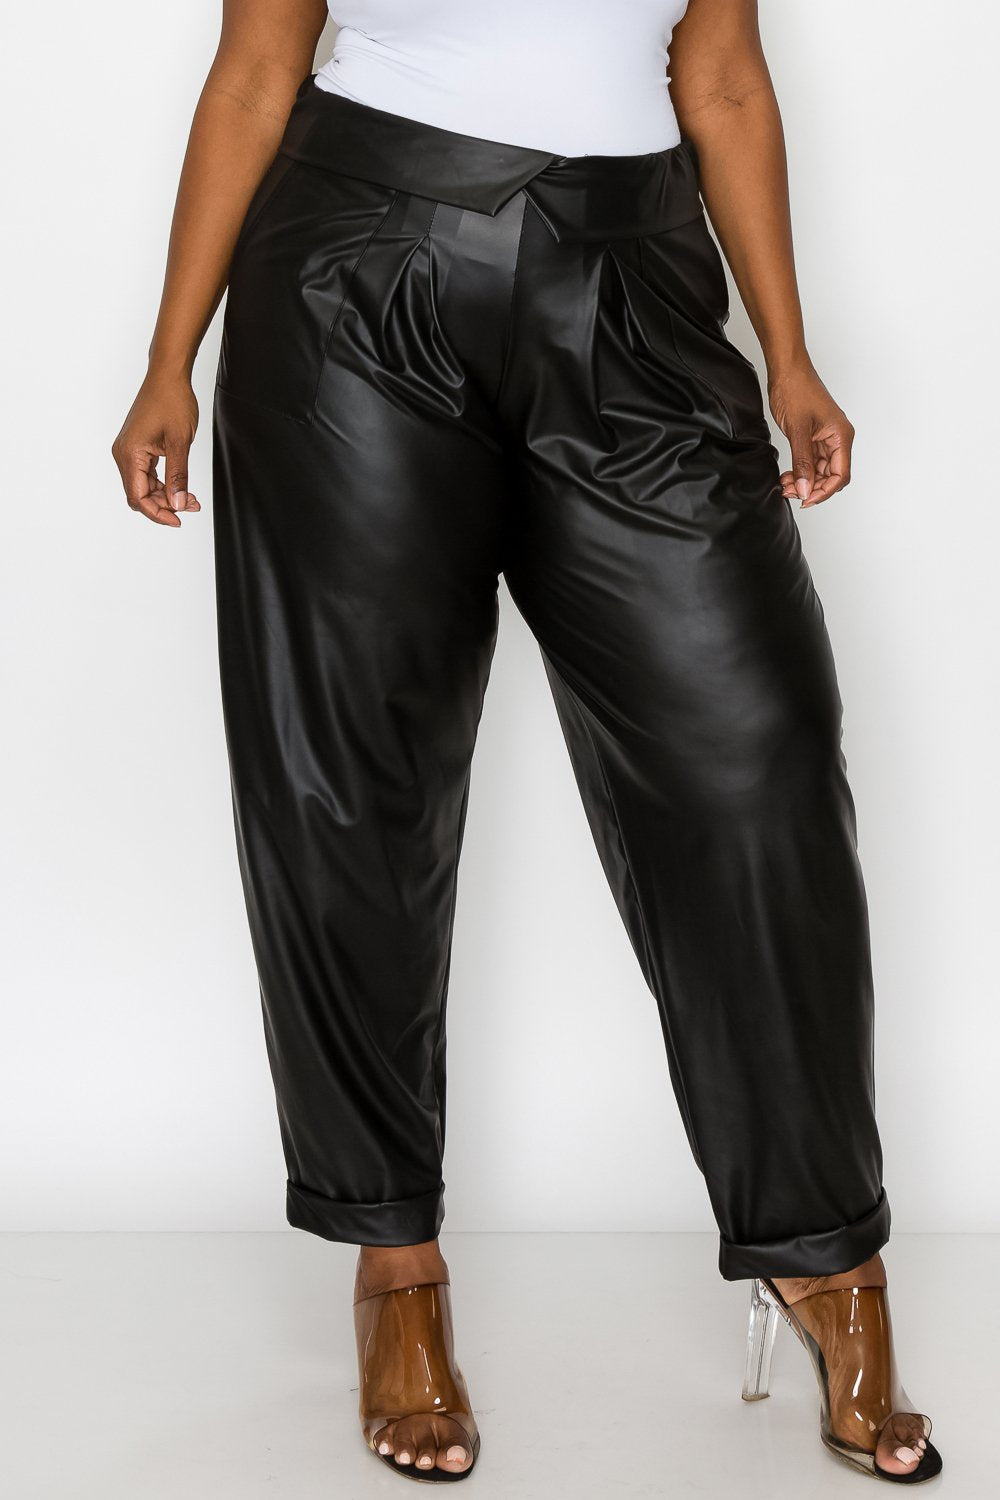 livd L I V D women's trendy plus size fashion made in USA contemporary collared faux leather pants pu with large outside pockets and folded ankle cuff in black 